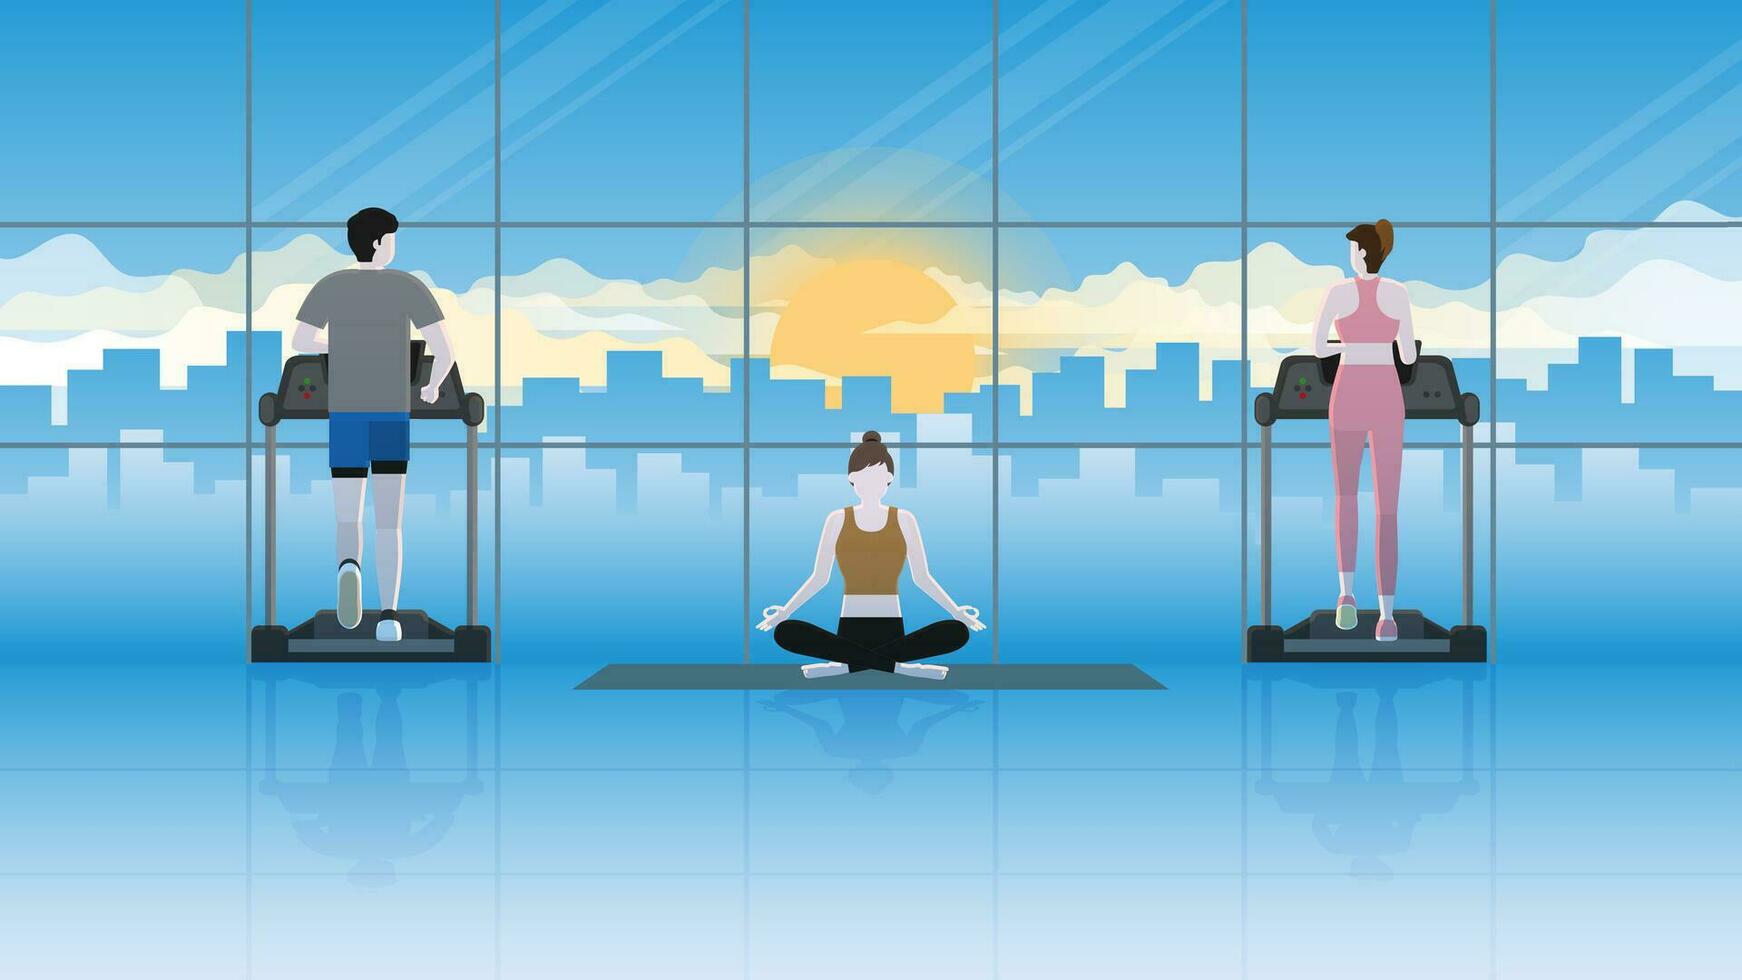 A calm yoga woman sits and meditates in a fitness center between runners on a treadmill vector